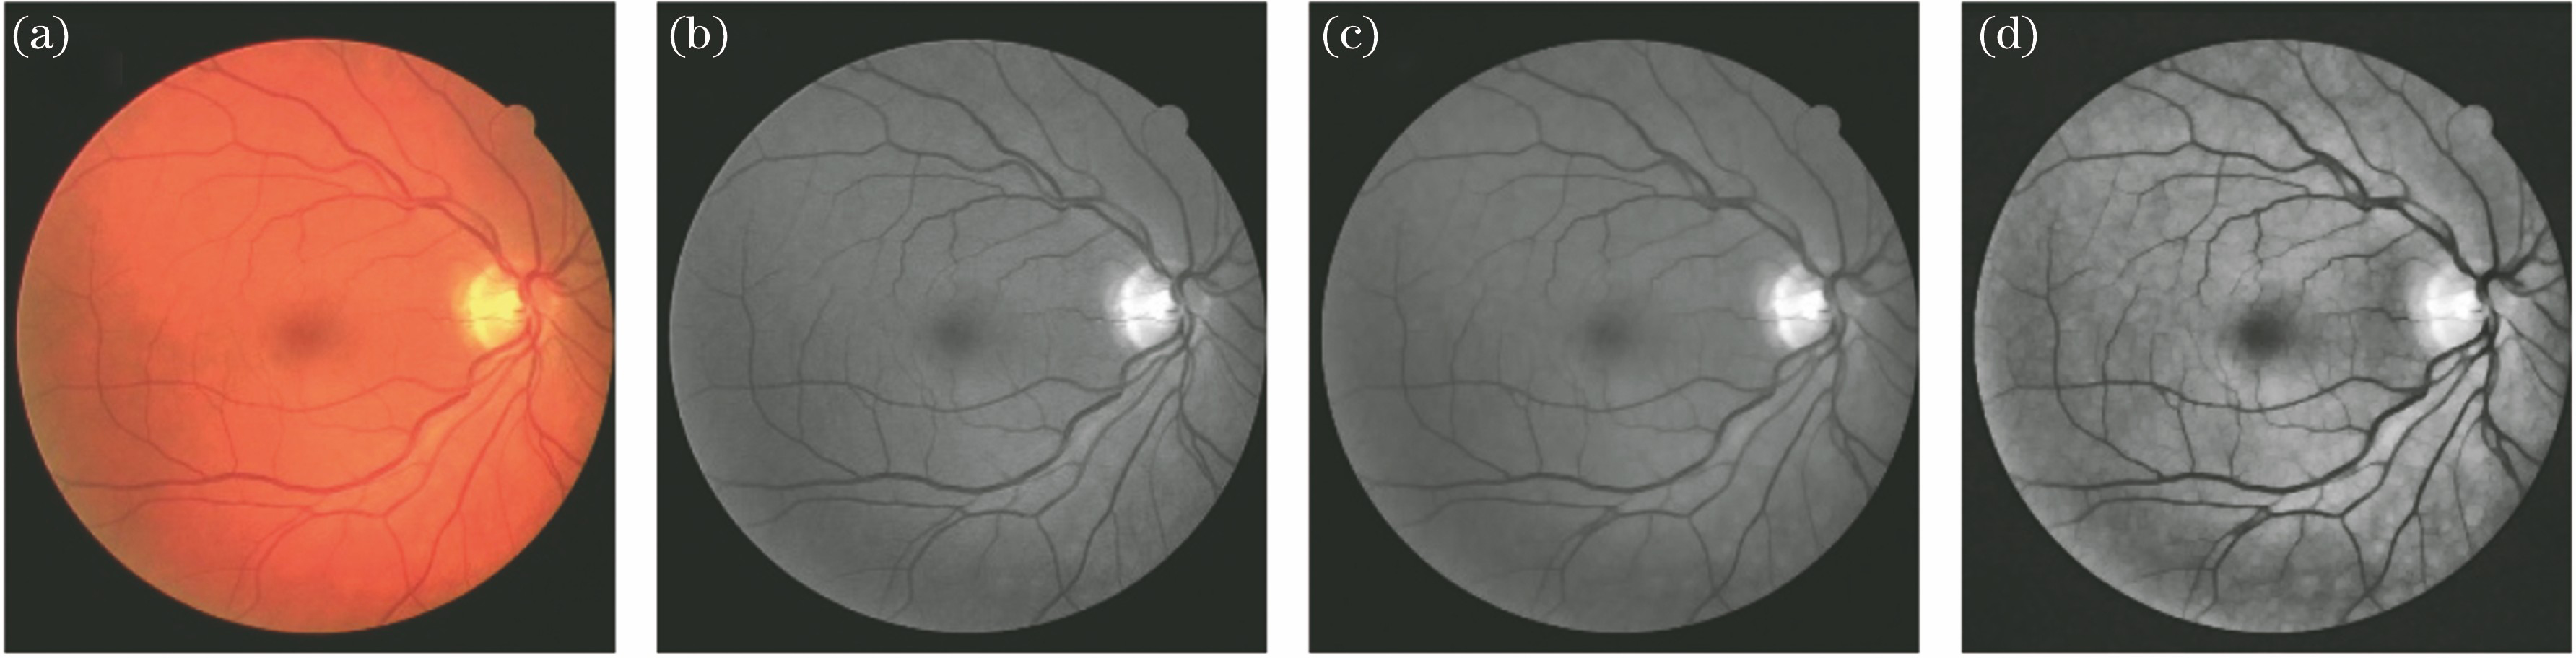 Images of the pre-processing results. (a) Color fundus image; (b) green channel; (c) morphological open operation of Fig. 2(b); (d) image enhancement of Fig. 2(c) by CLAHE